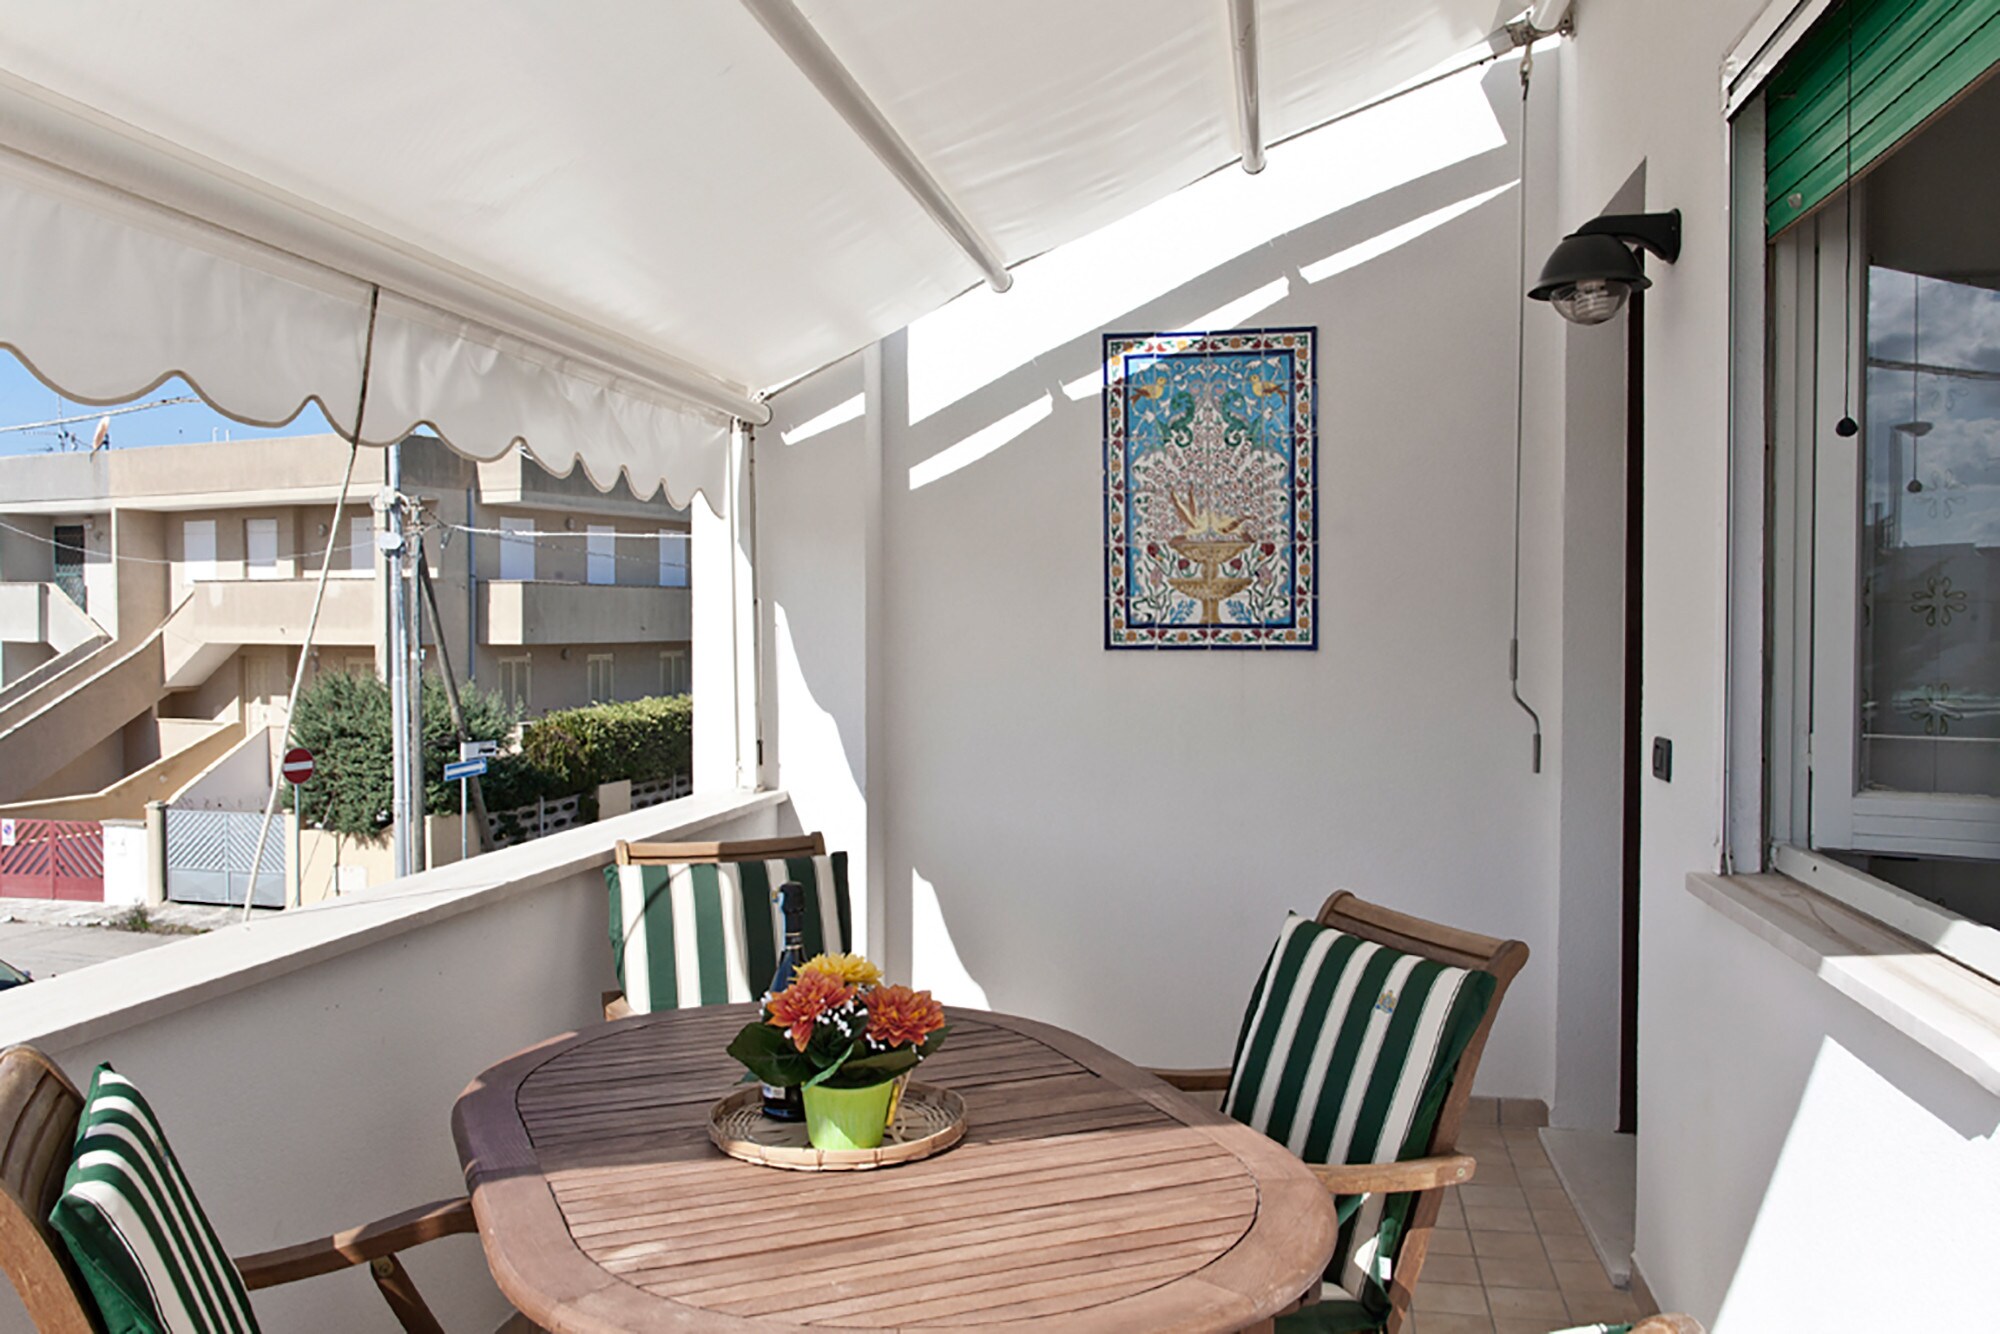 Property Image 2 - Flat with terrace very close to beach and centre Torre Dell’Orso m111